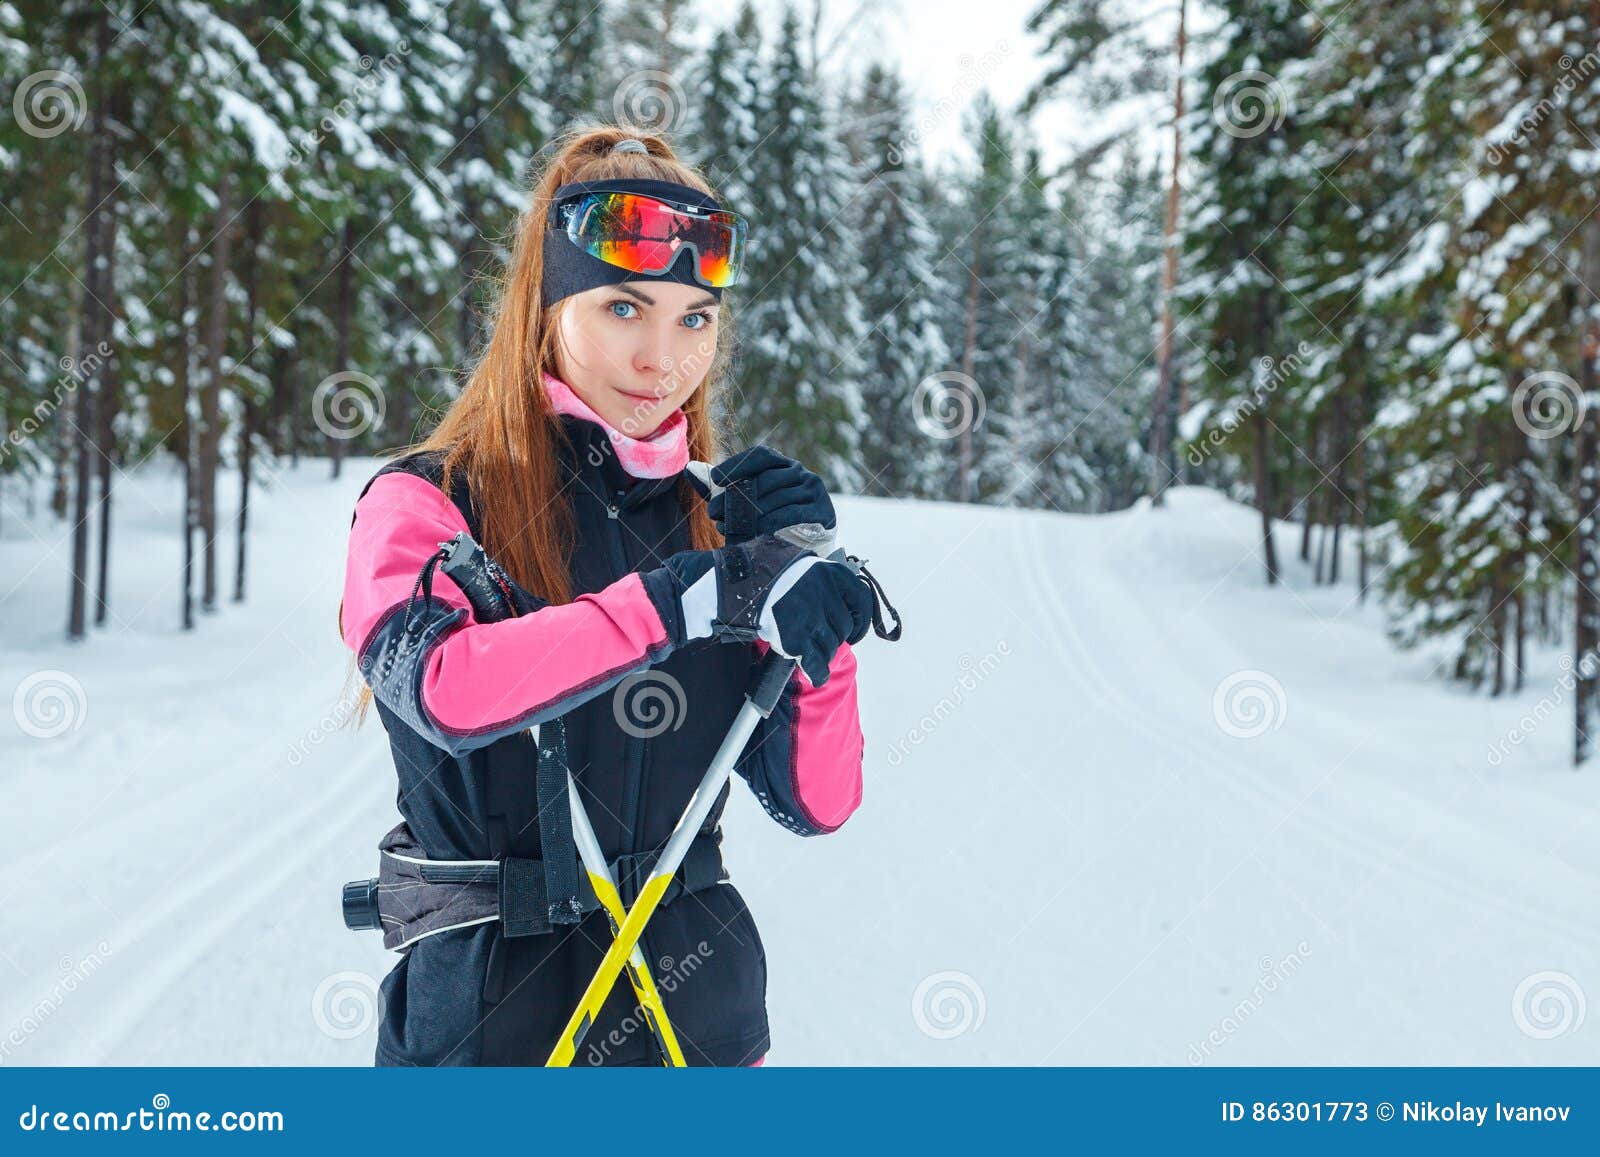 Professional Skier Girl White Skin Dress Ski Gloves Stock Image - Image of  country, person: 86301773